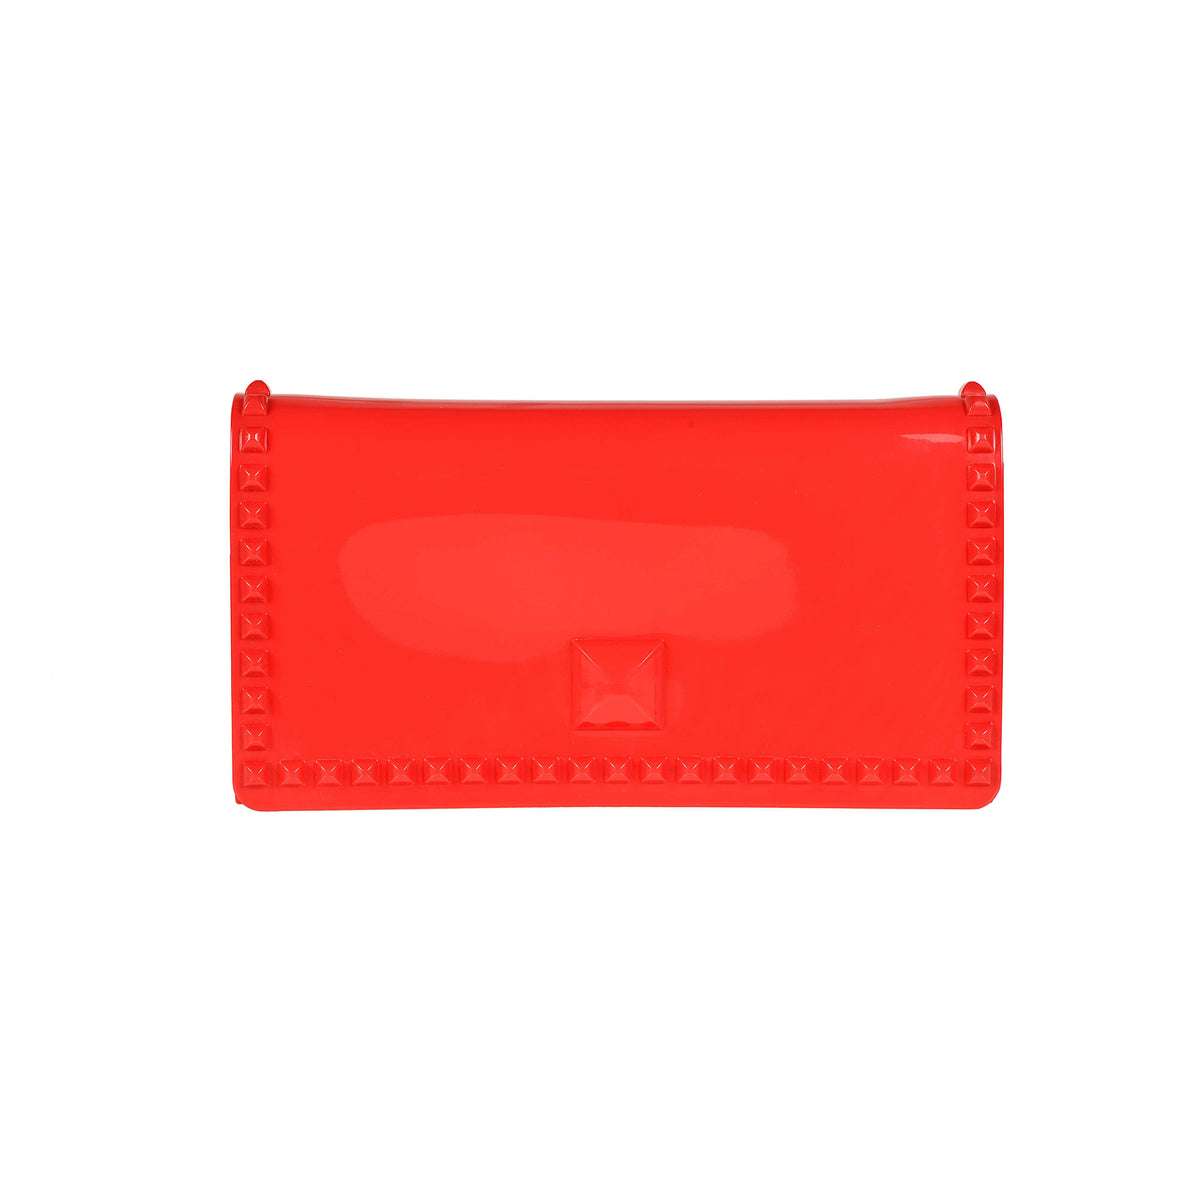 Nora jelly purse in color red with studded design for the beach